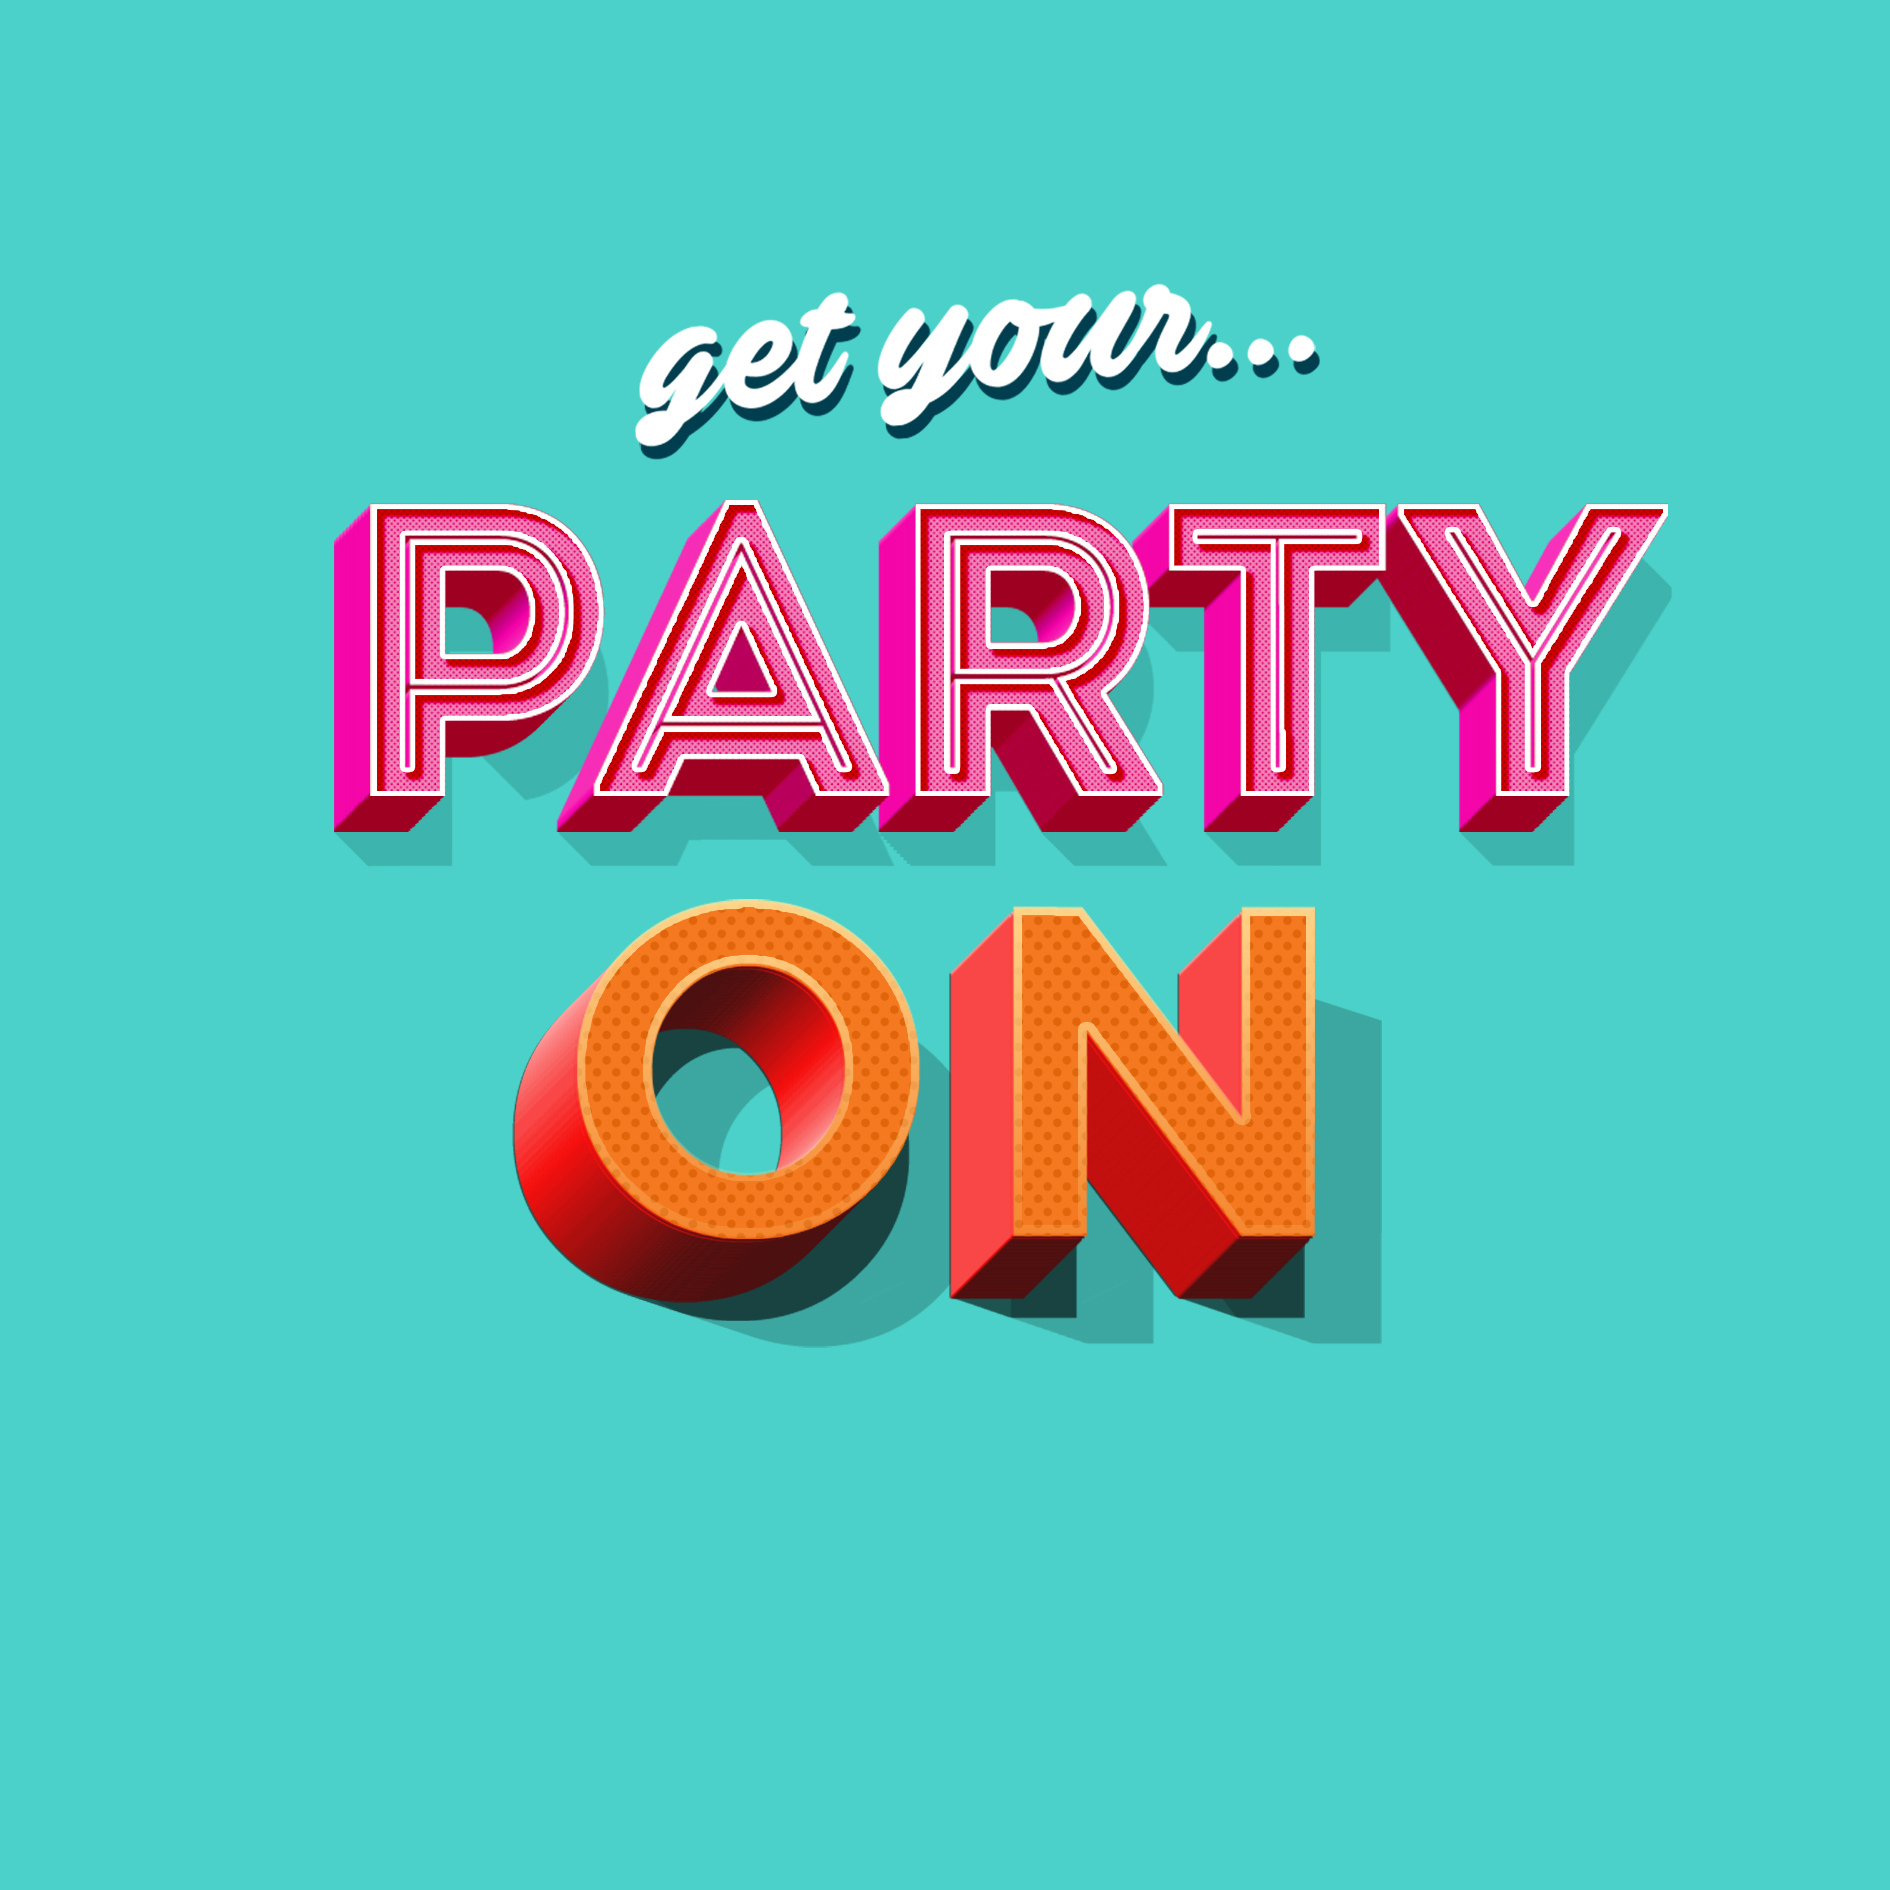 GET YOUR PARTY ON.jpg